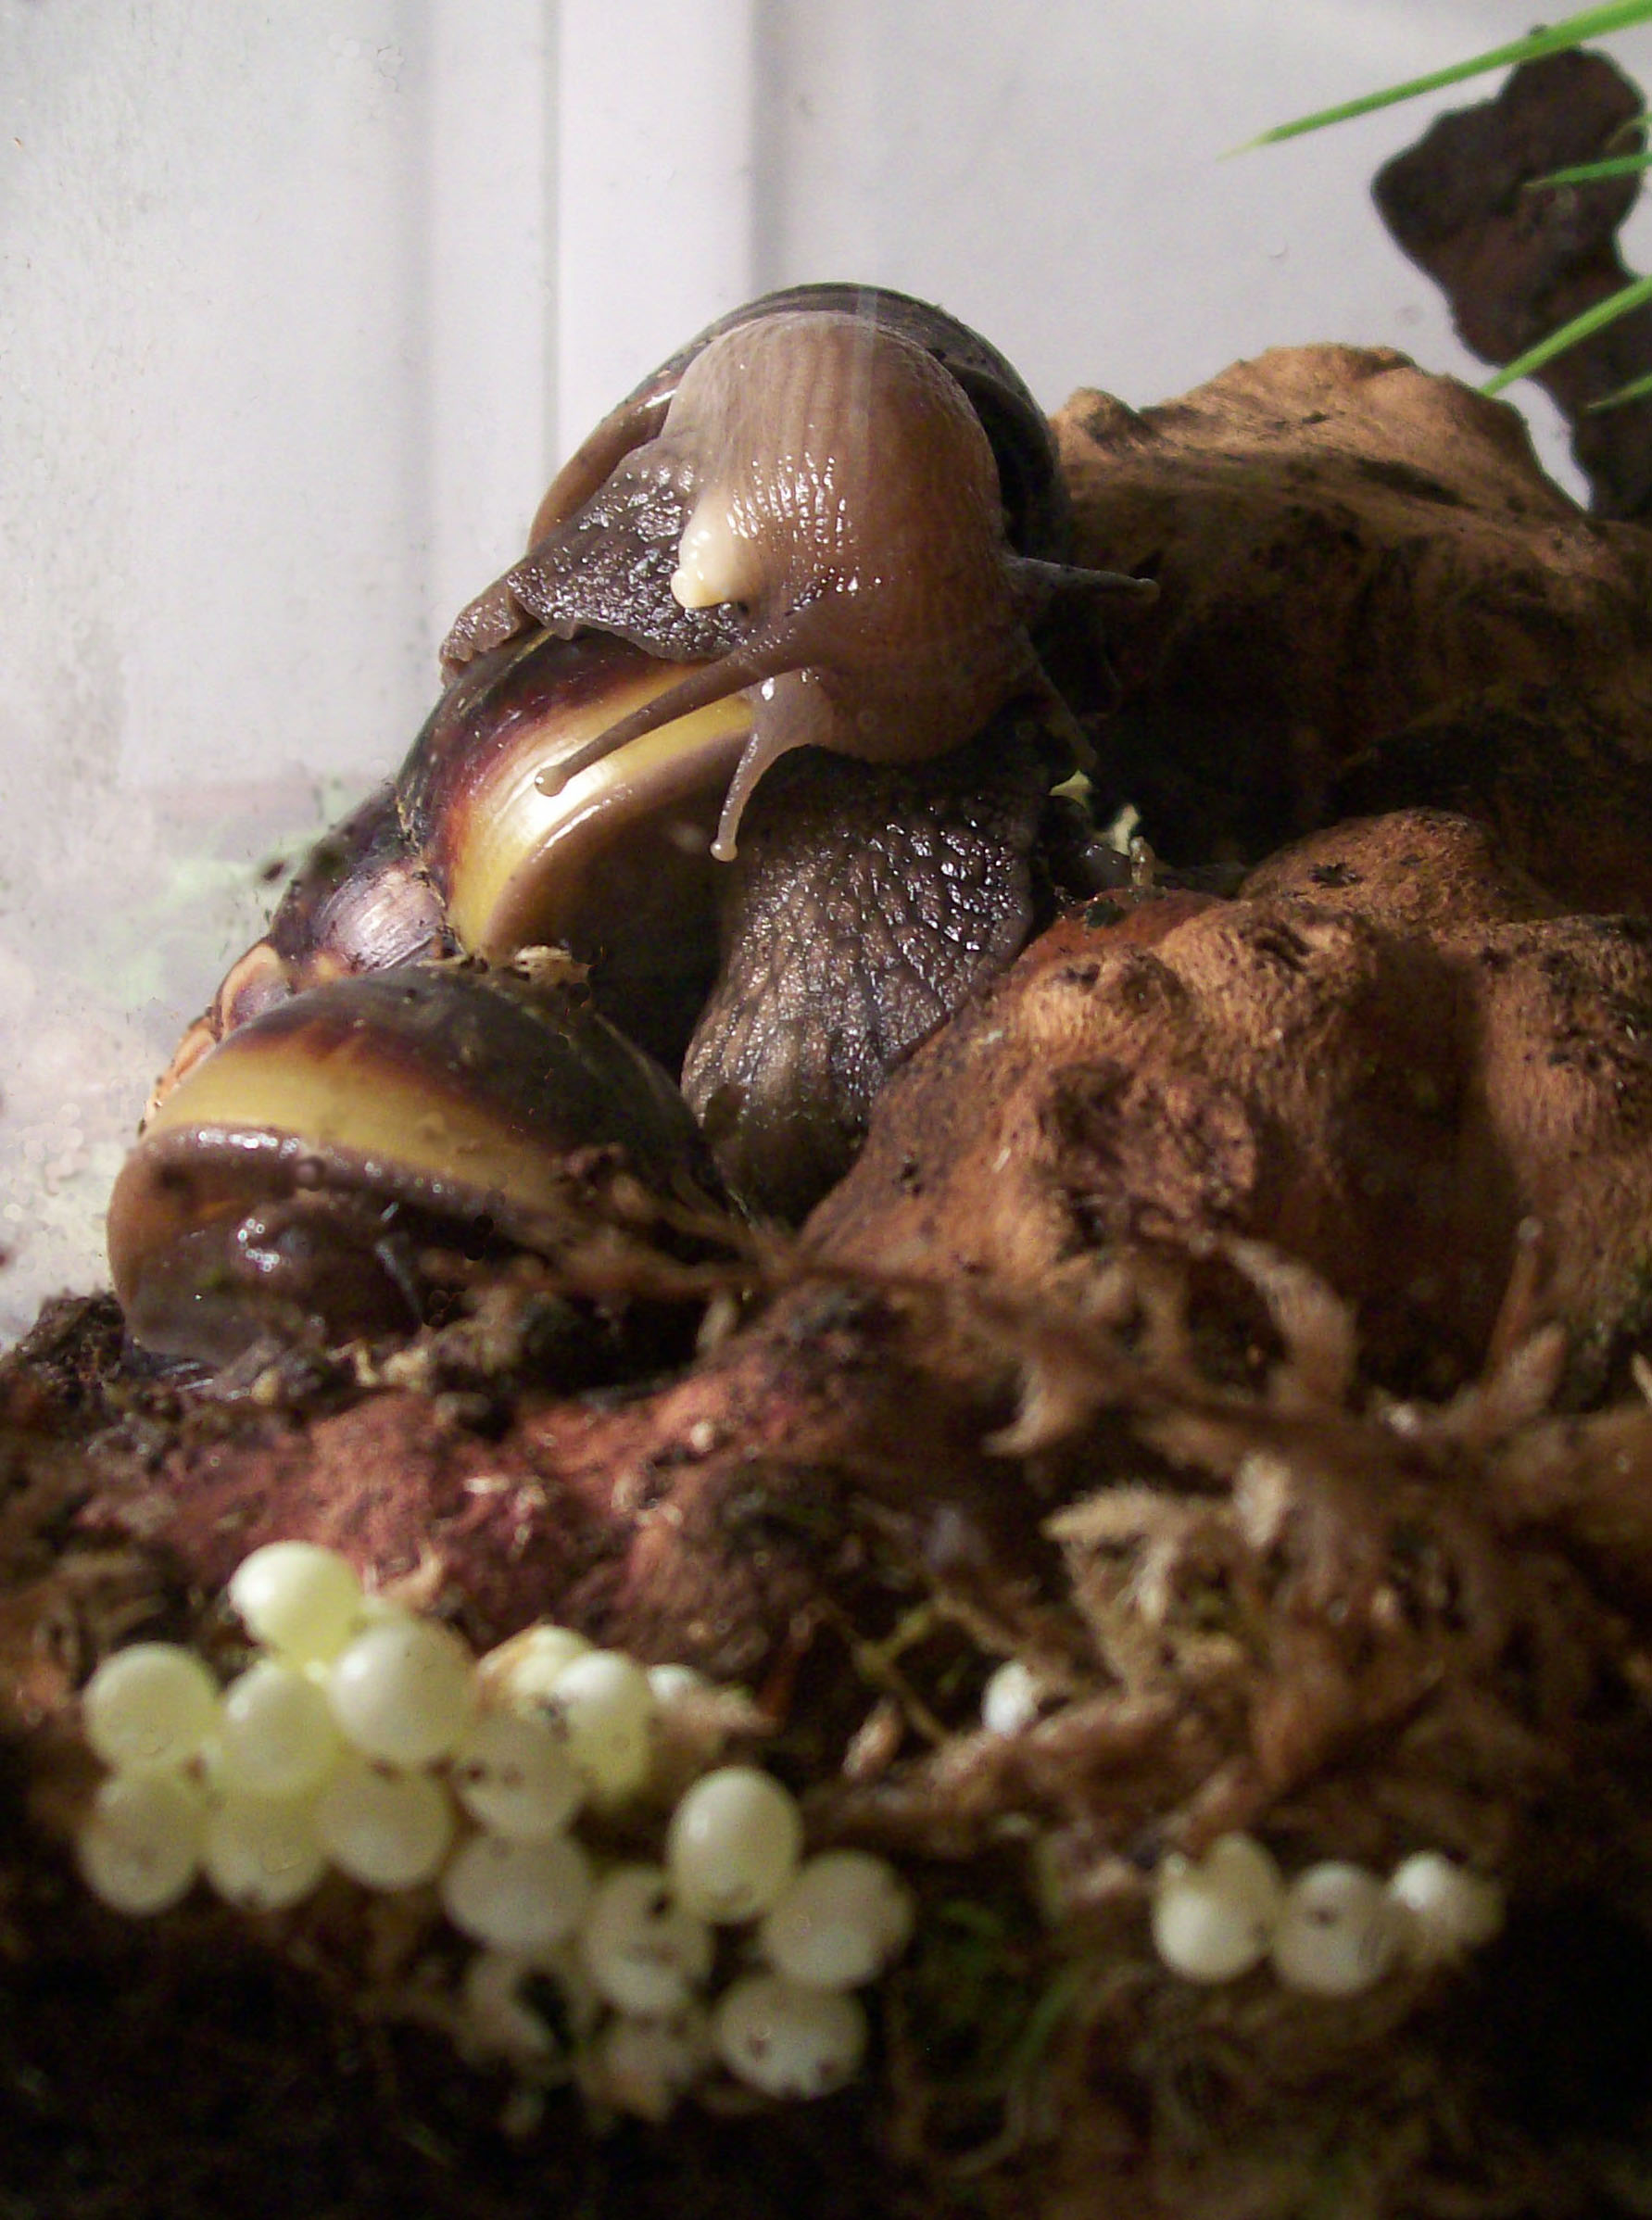 Giant African Land Snails Mating & Snail Eggs photo.